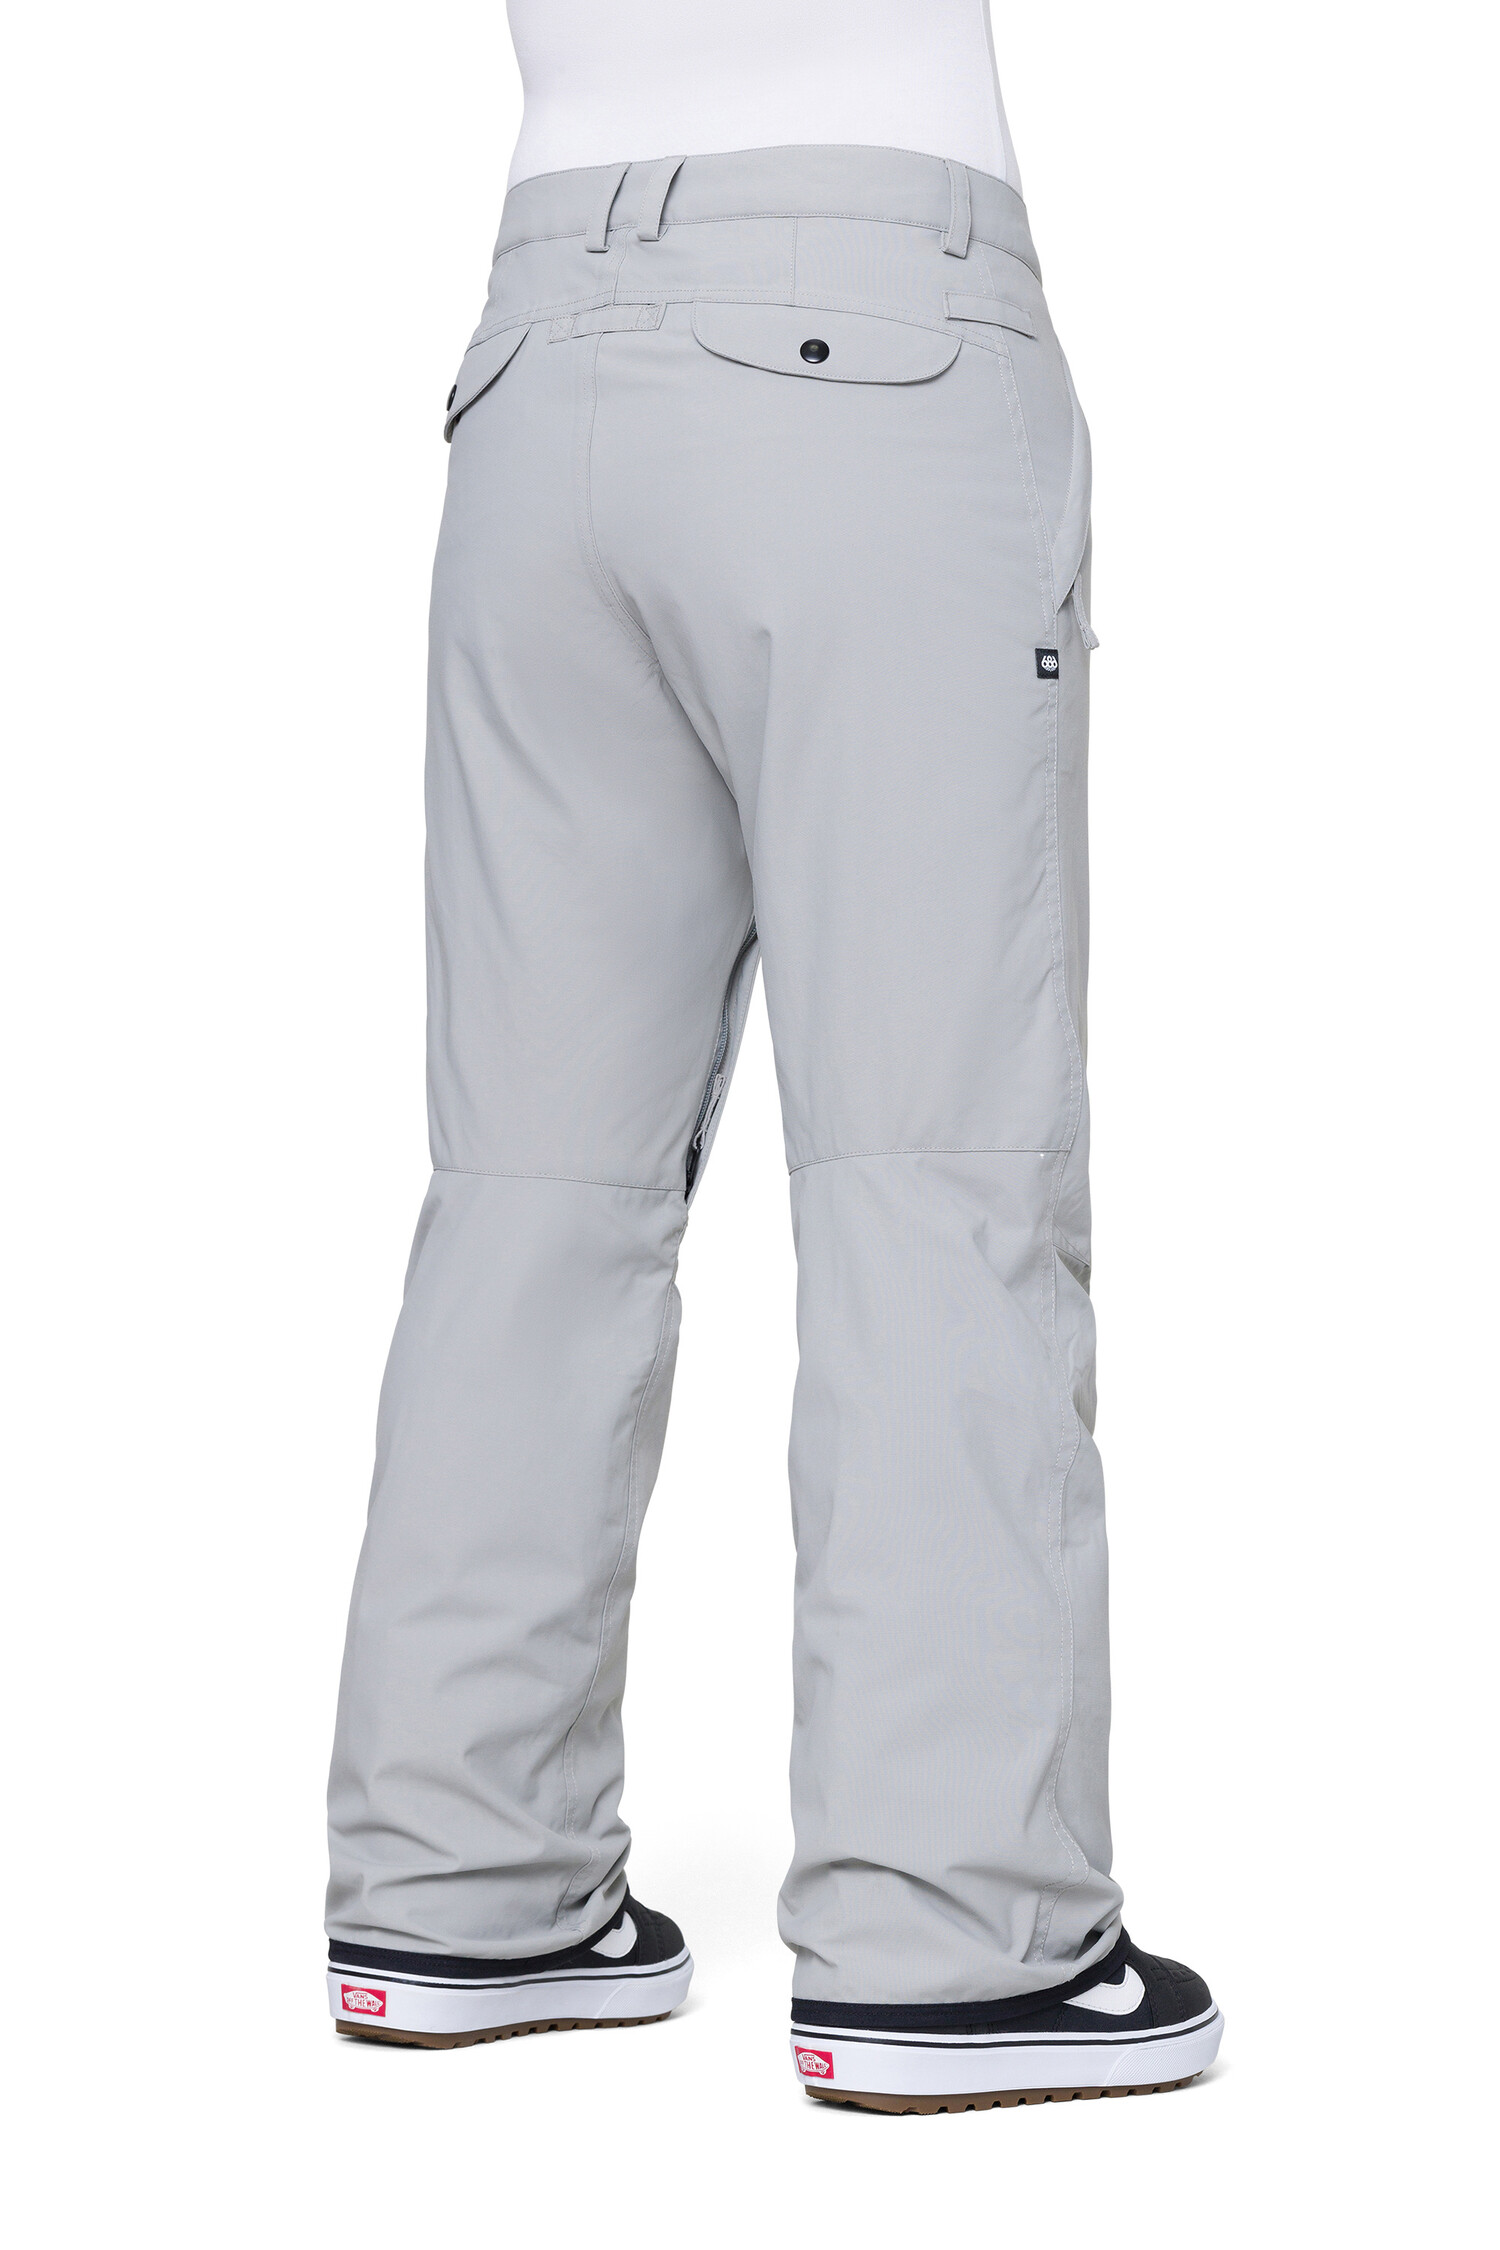 Women's Snow Pants - Sully's Lifestyle